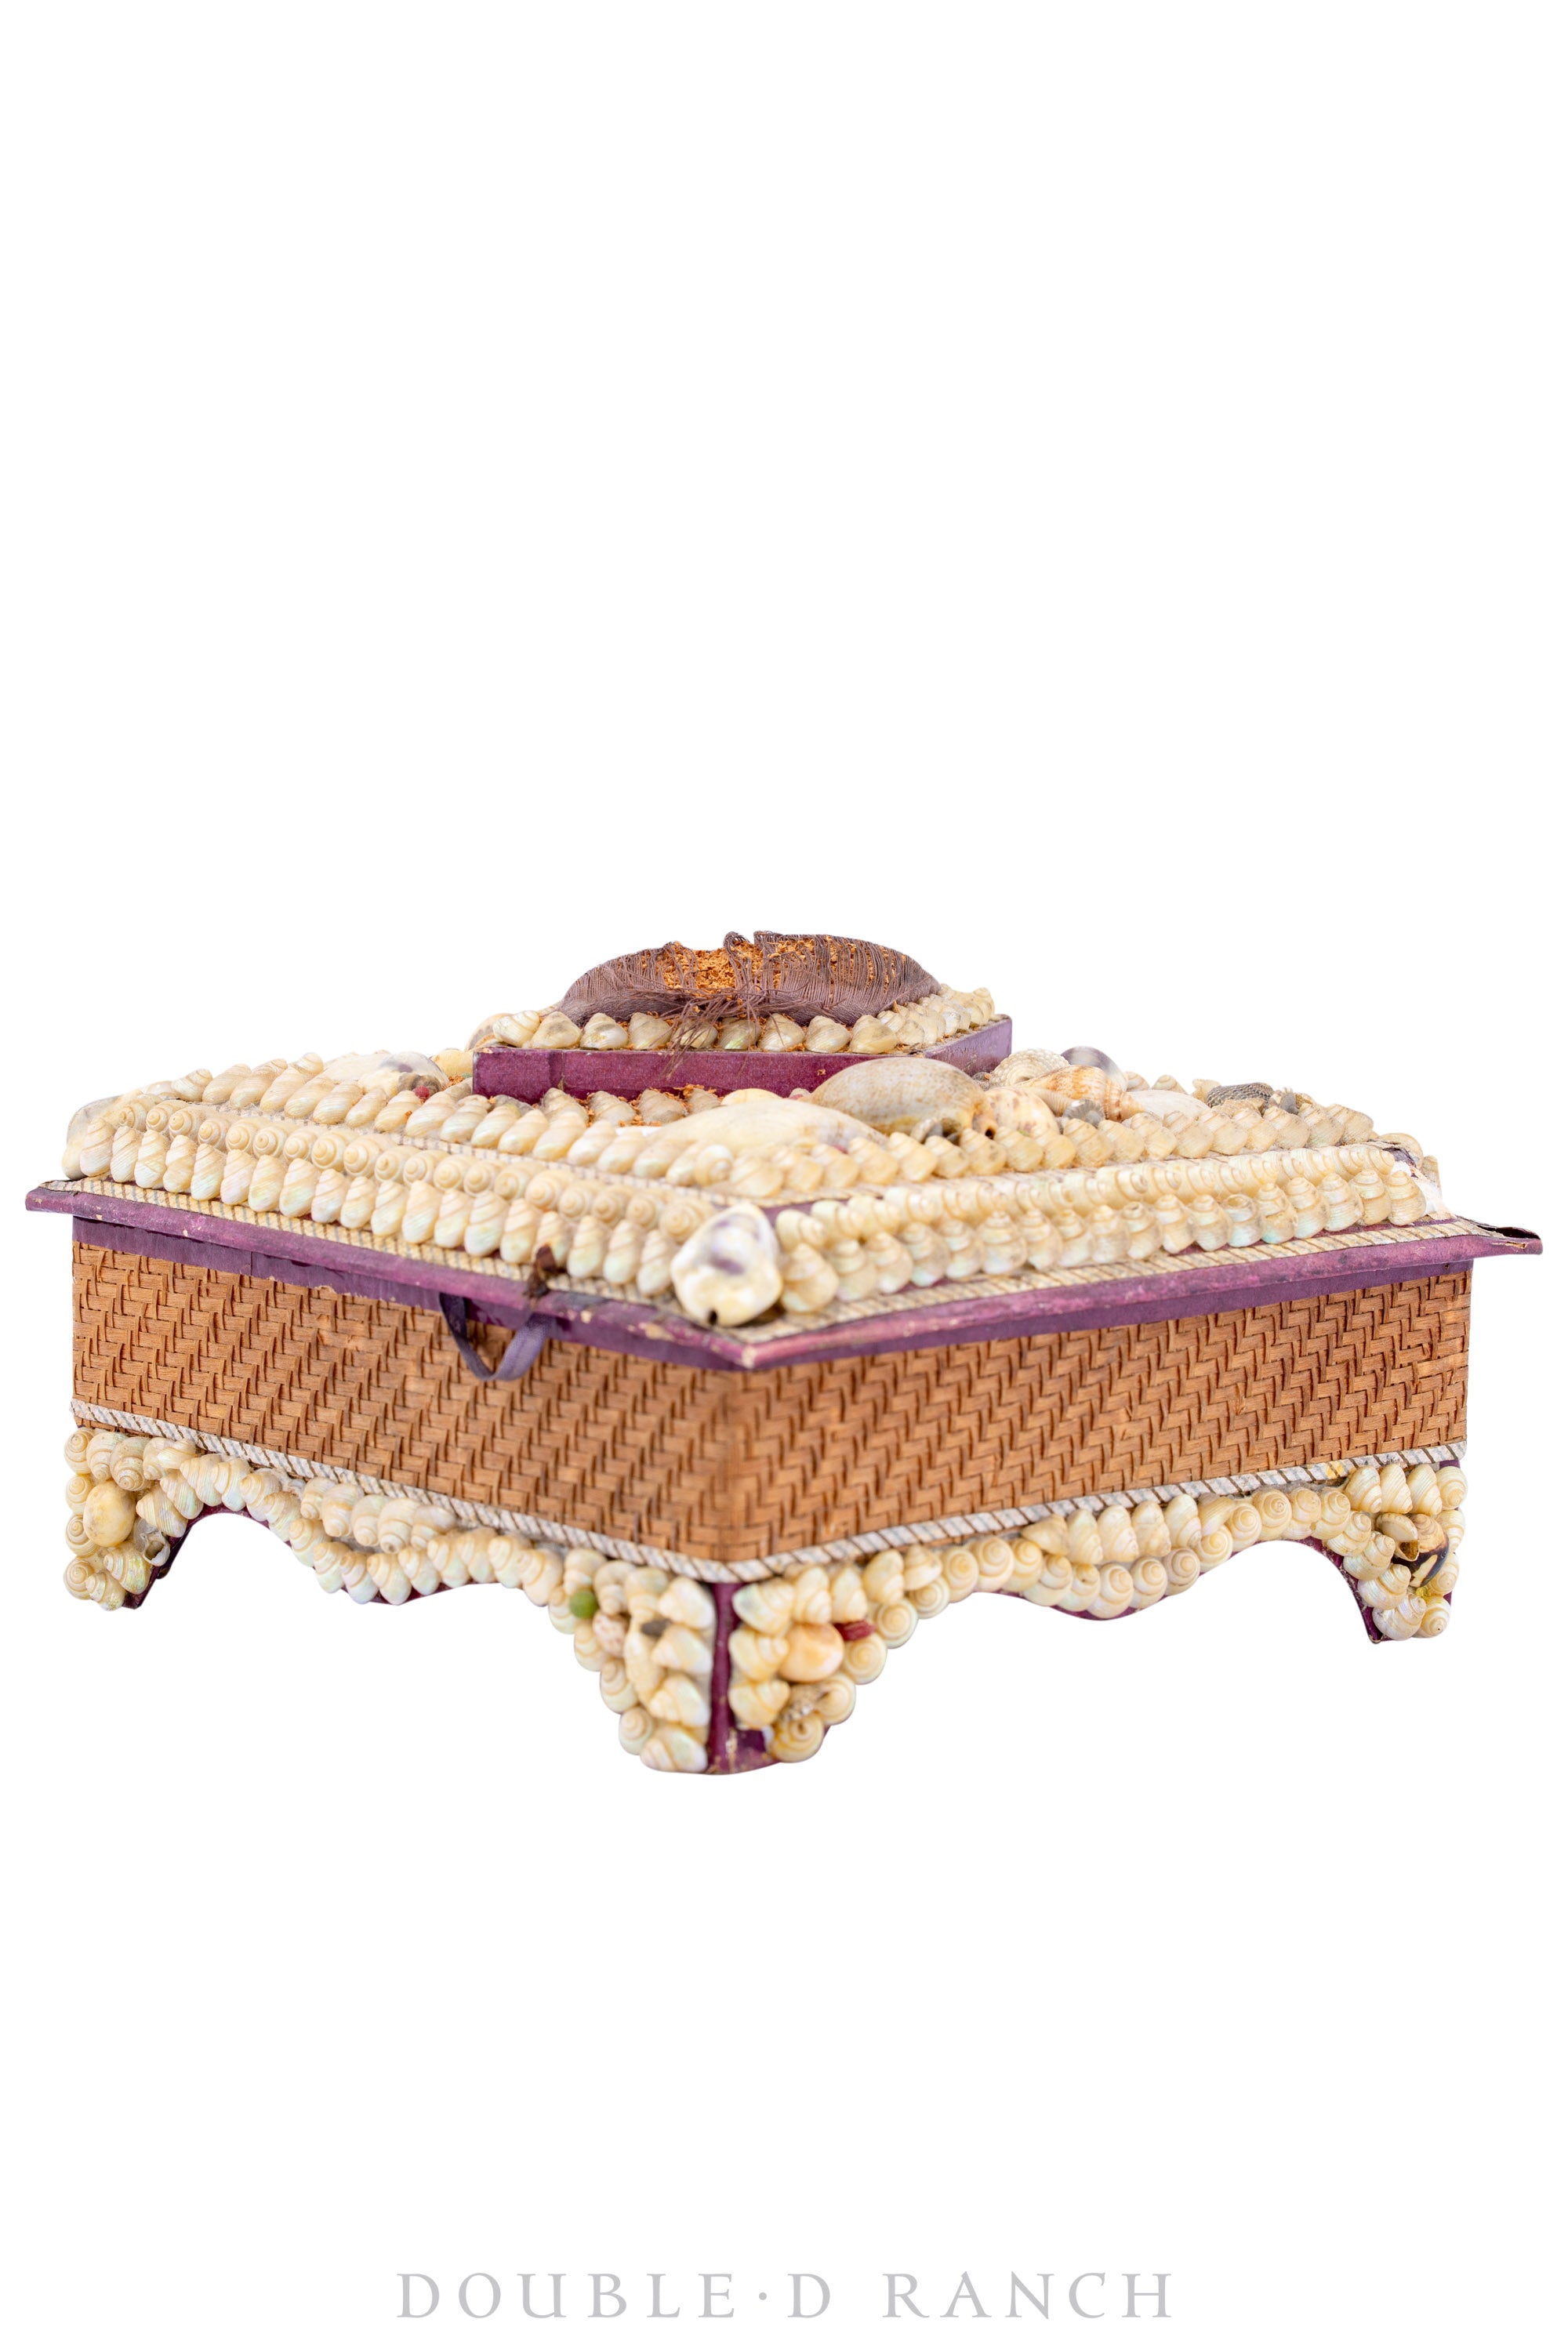 Miscellaneous, Encrusted Shell Box, Vintage, 495